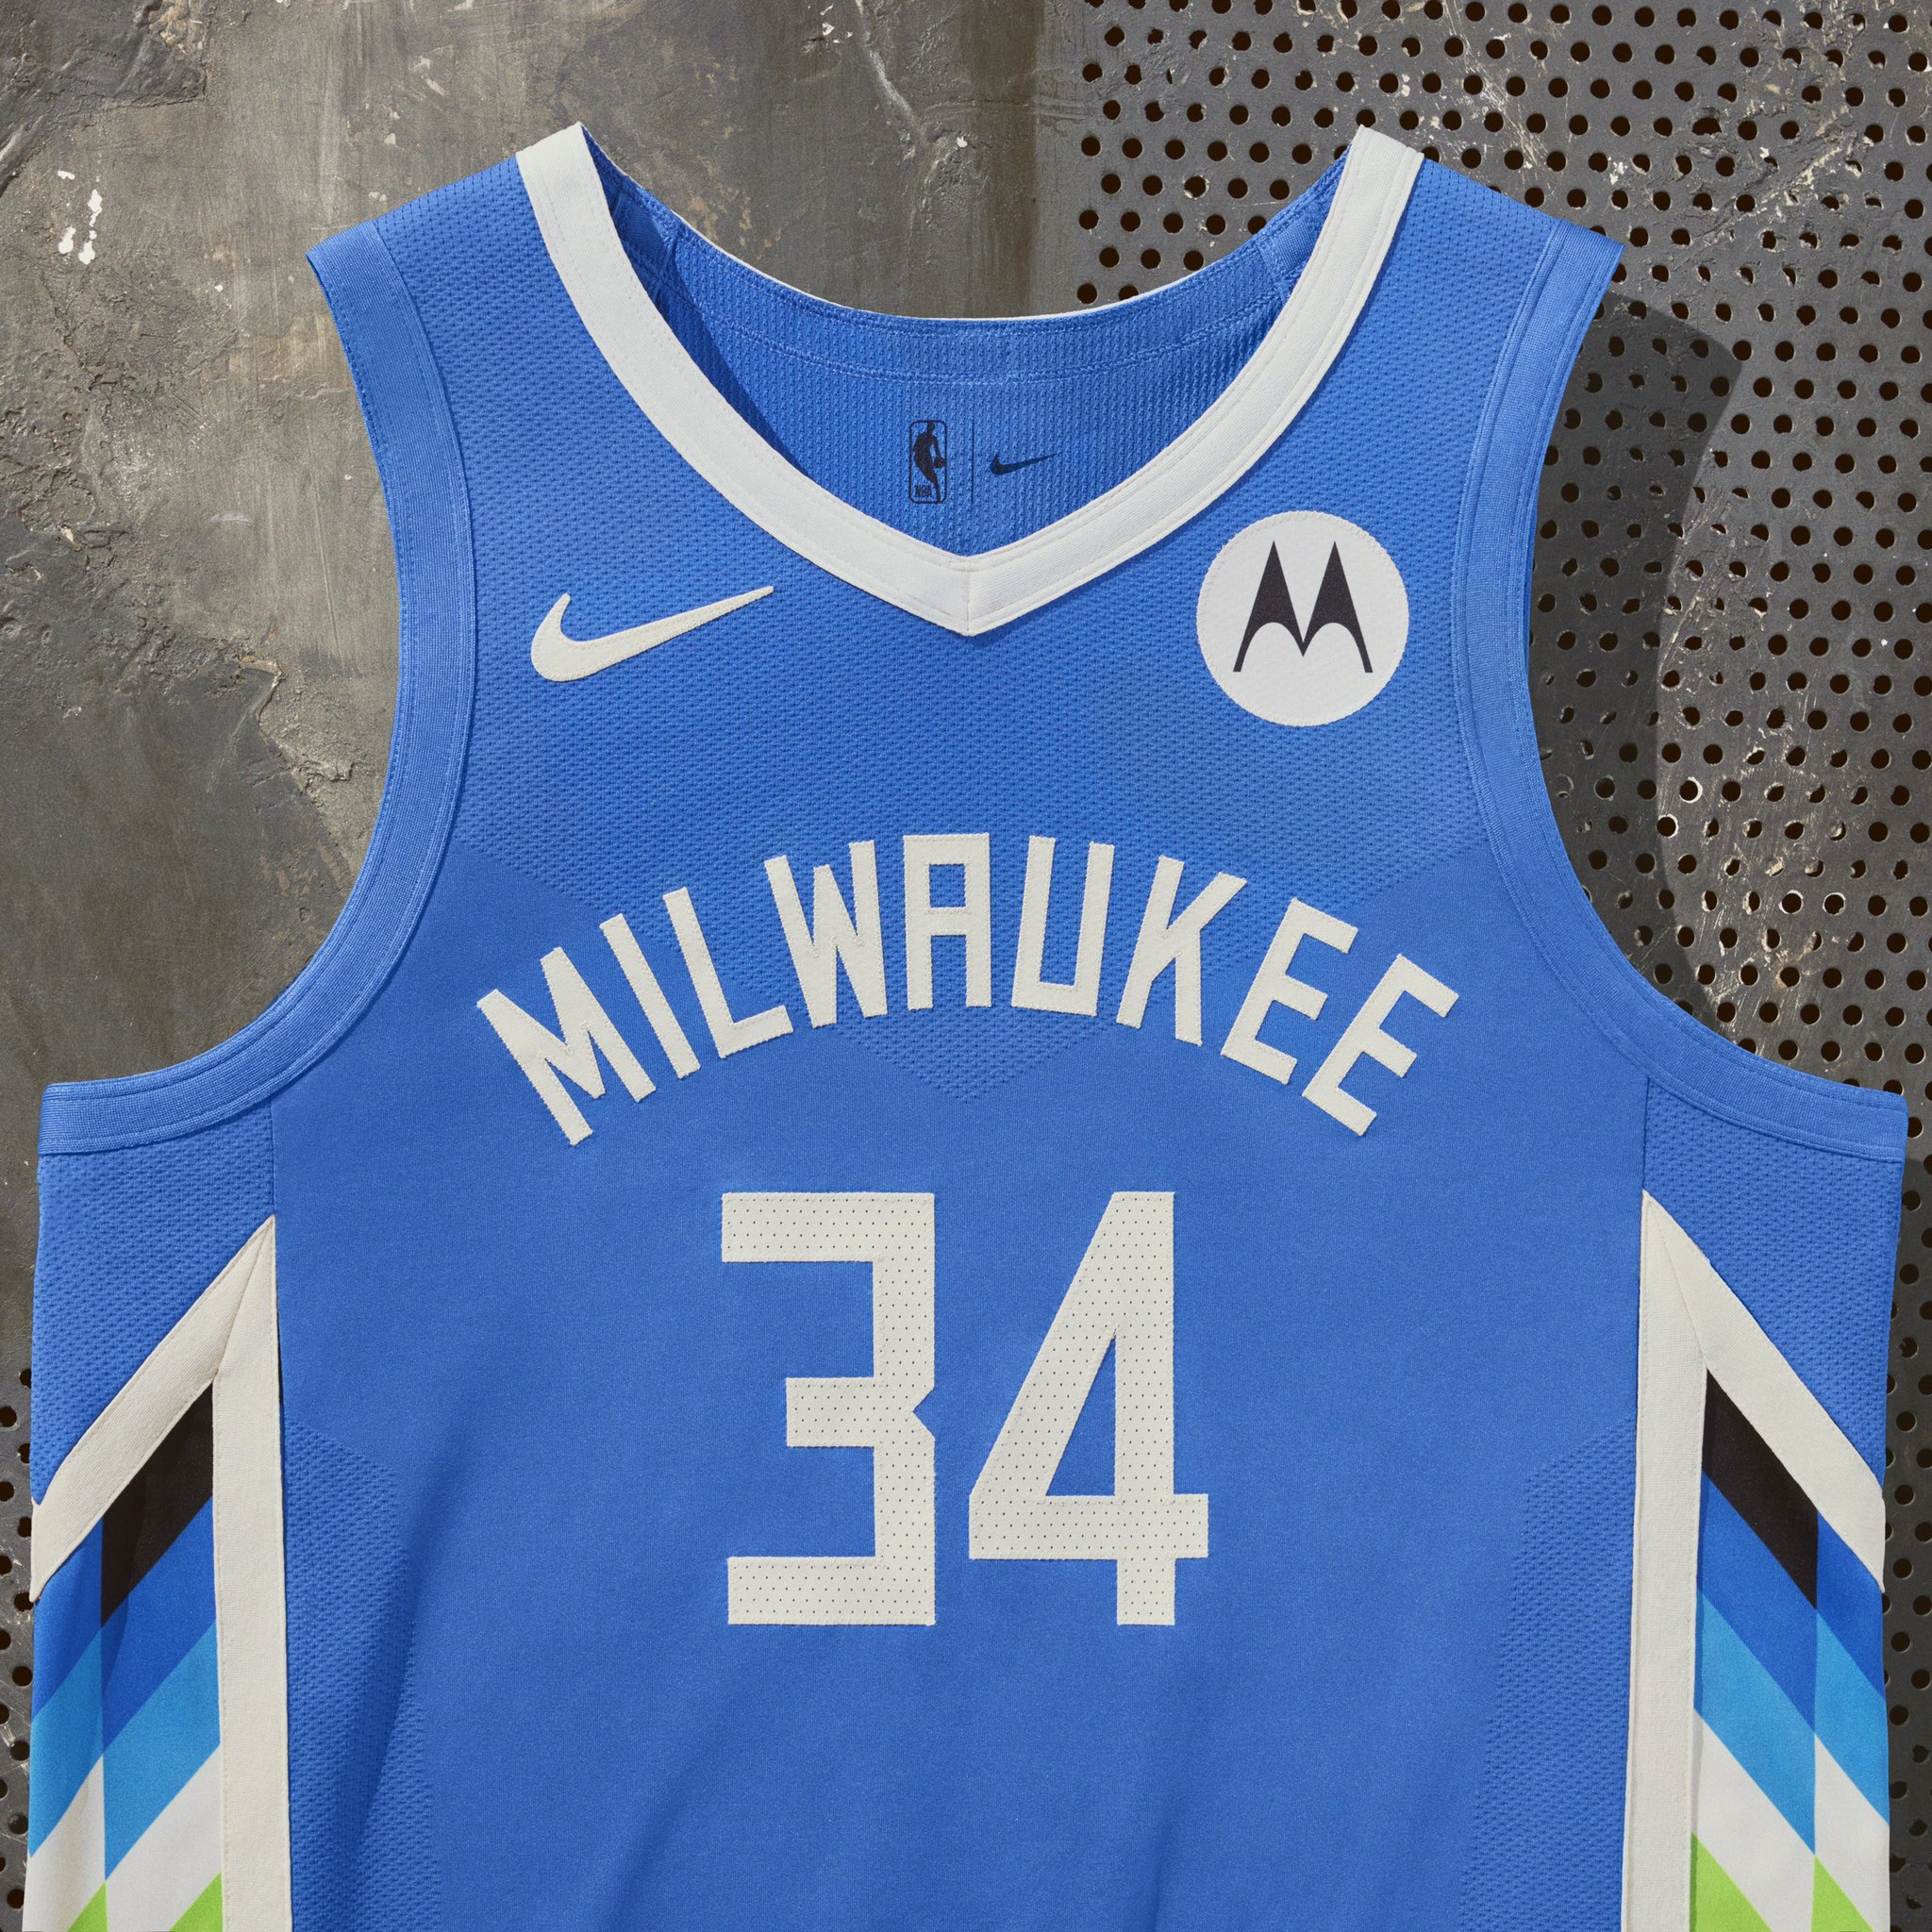 Nick DePaula on X: The Milwaukee Bucks' City Edition jersey honors  Bronzeville, the city's historically African American neighborhood and hub  of culture & arts. A patchwork side panel is inspired by local